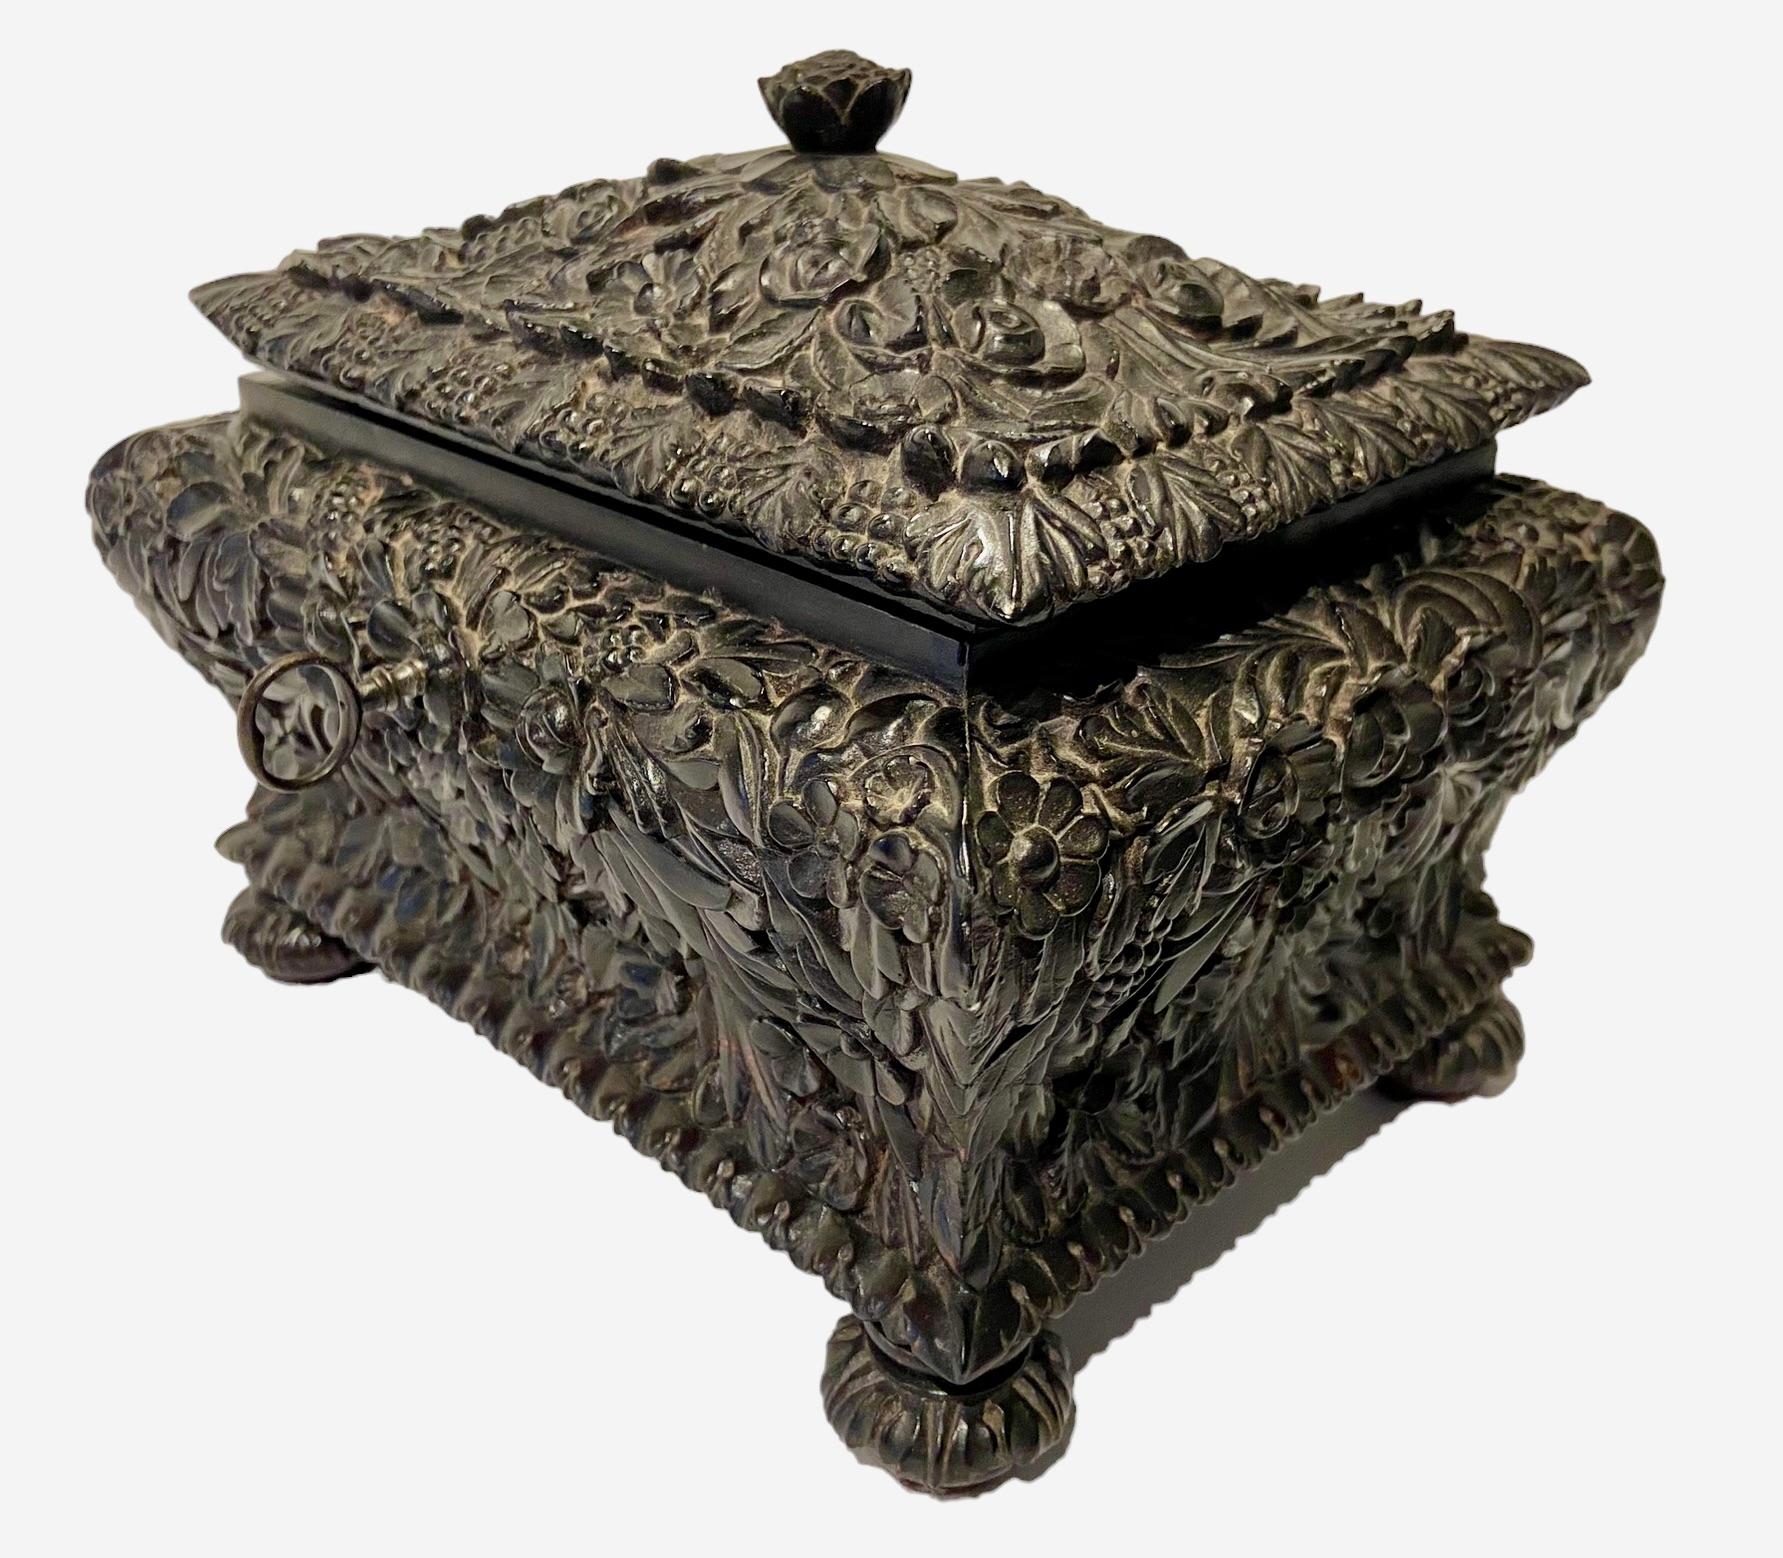 A Dutch colonial box from Batavia in the former Dutch East Indies.
Hand-carved with floral motives in ebony, used for jewelry or letters, 
ca. 1800. Original hinges and lock, including key.
The inside is finished with snakeskin and velvet.
 
